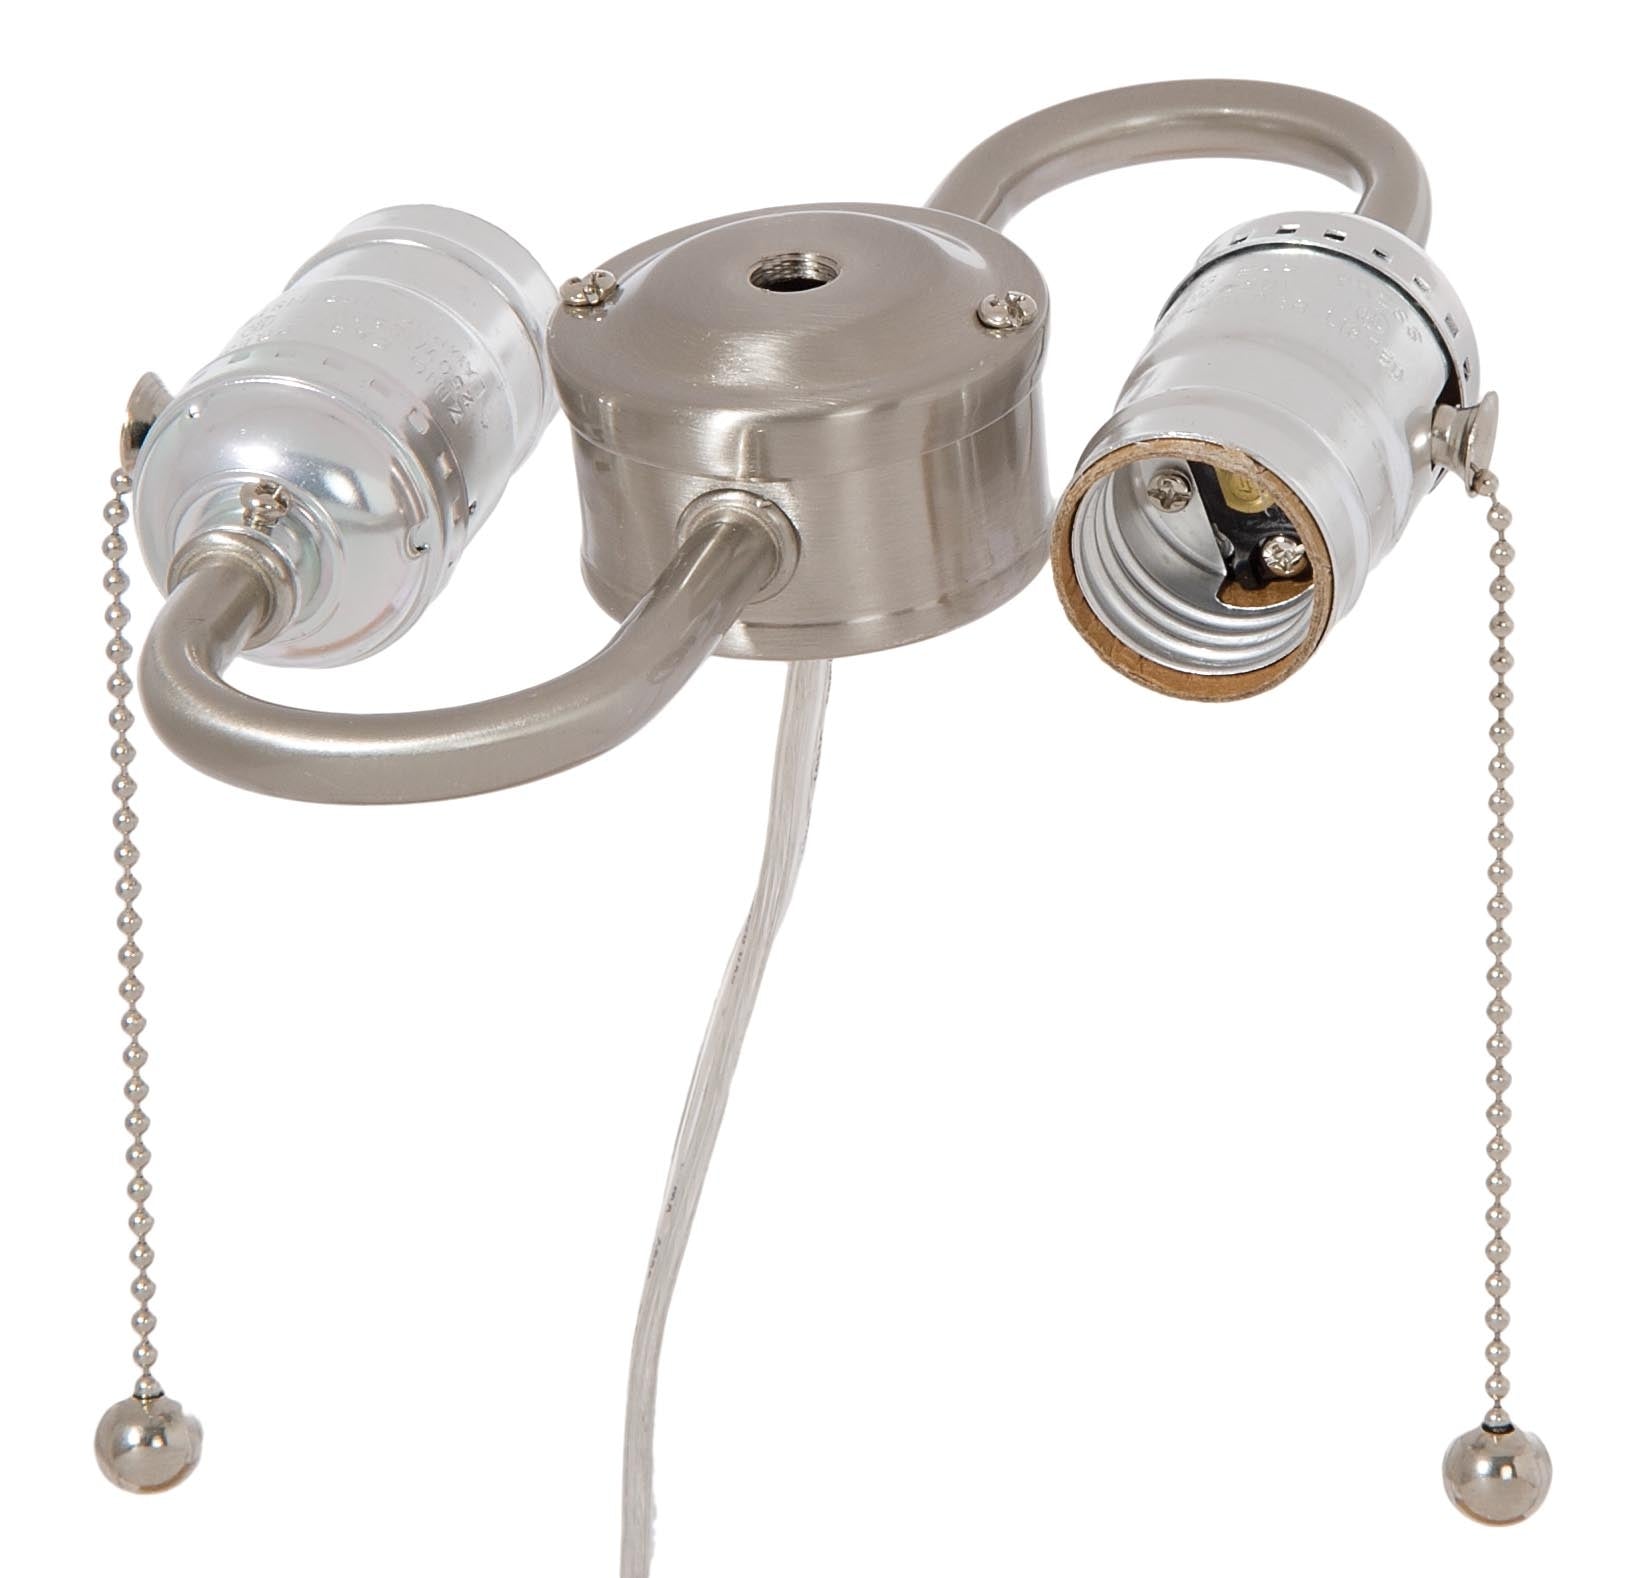 2 Light Wired Lamp Cluster with E-26 Base, Pull Chain Sockets, Satin Nickel Finish 